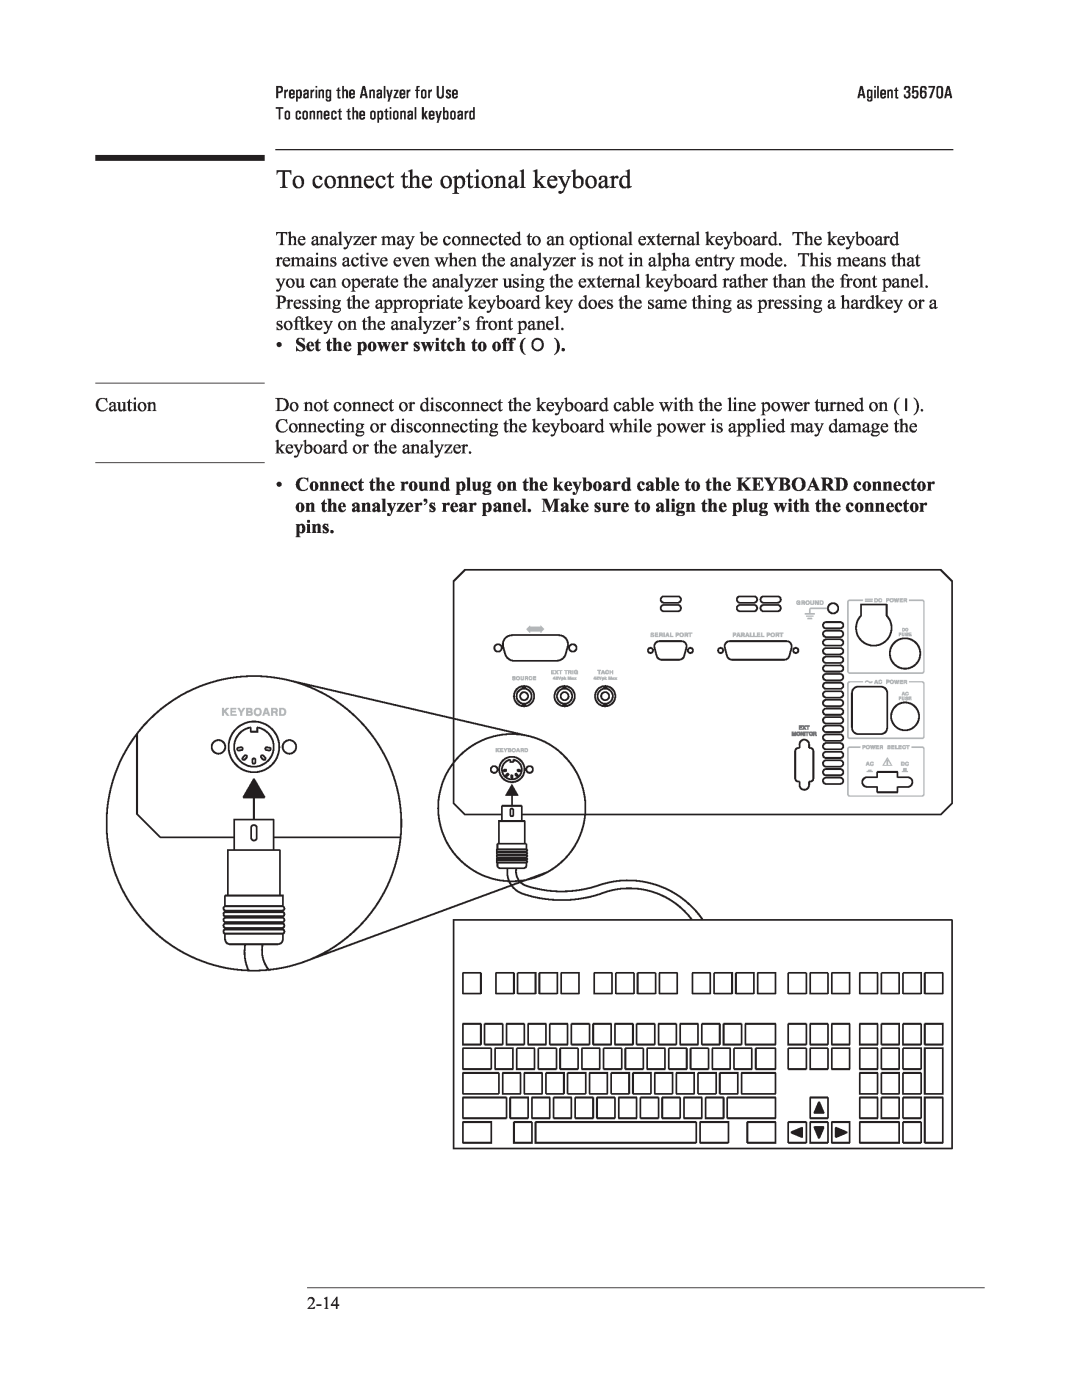 Agilent Technologies 35670-90066 manual To connect the optional keyboard, •Set the power switch to off O 